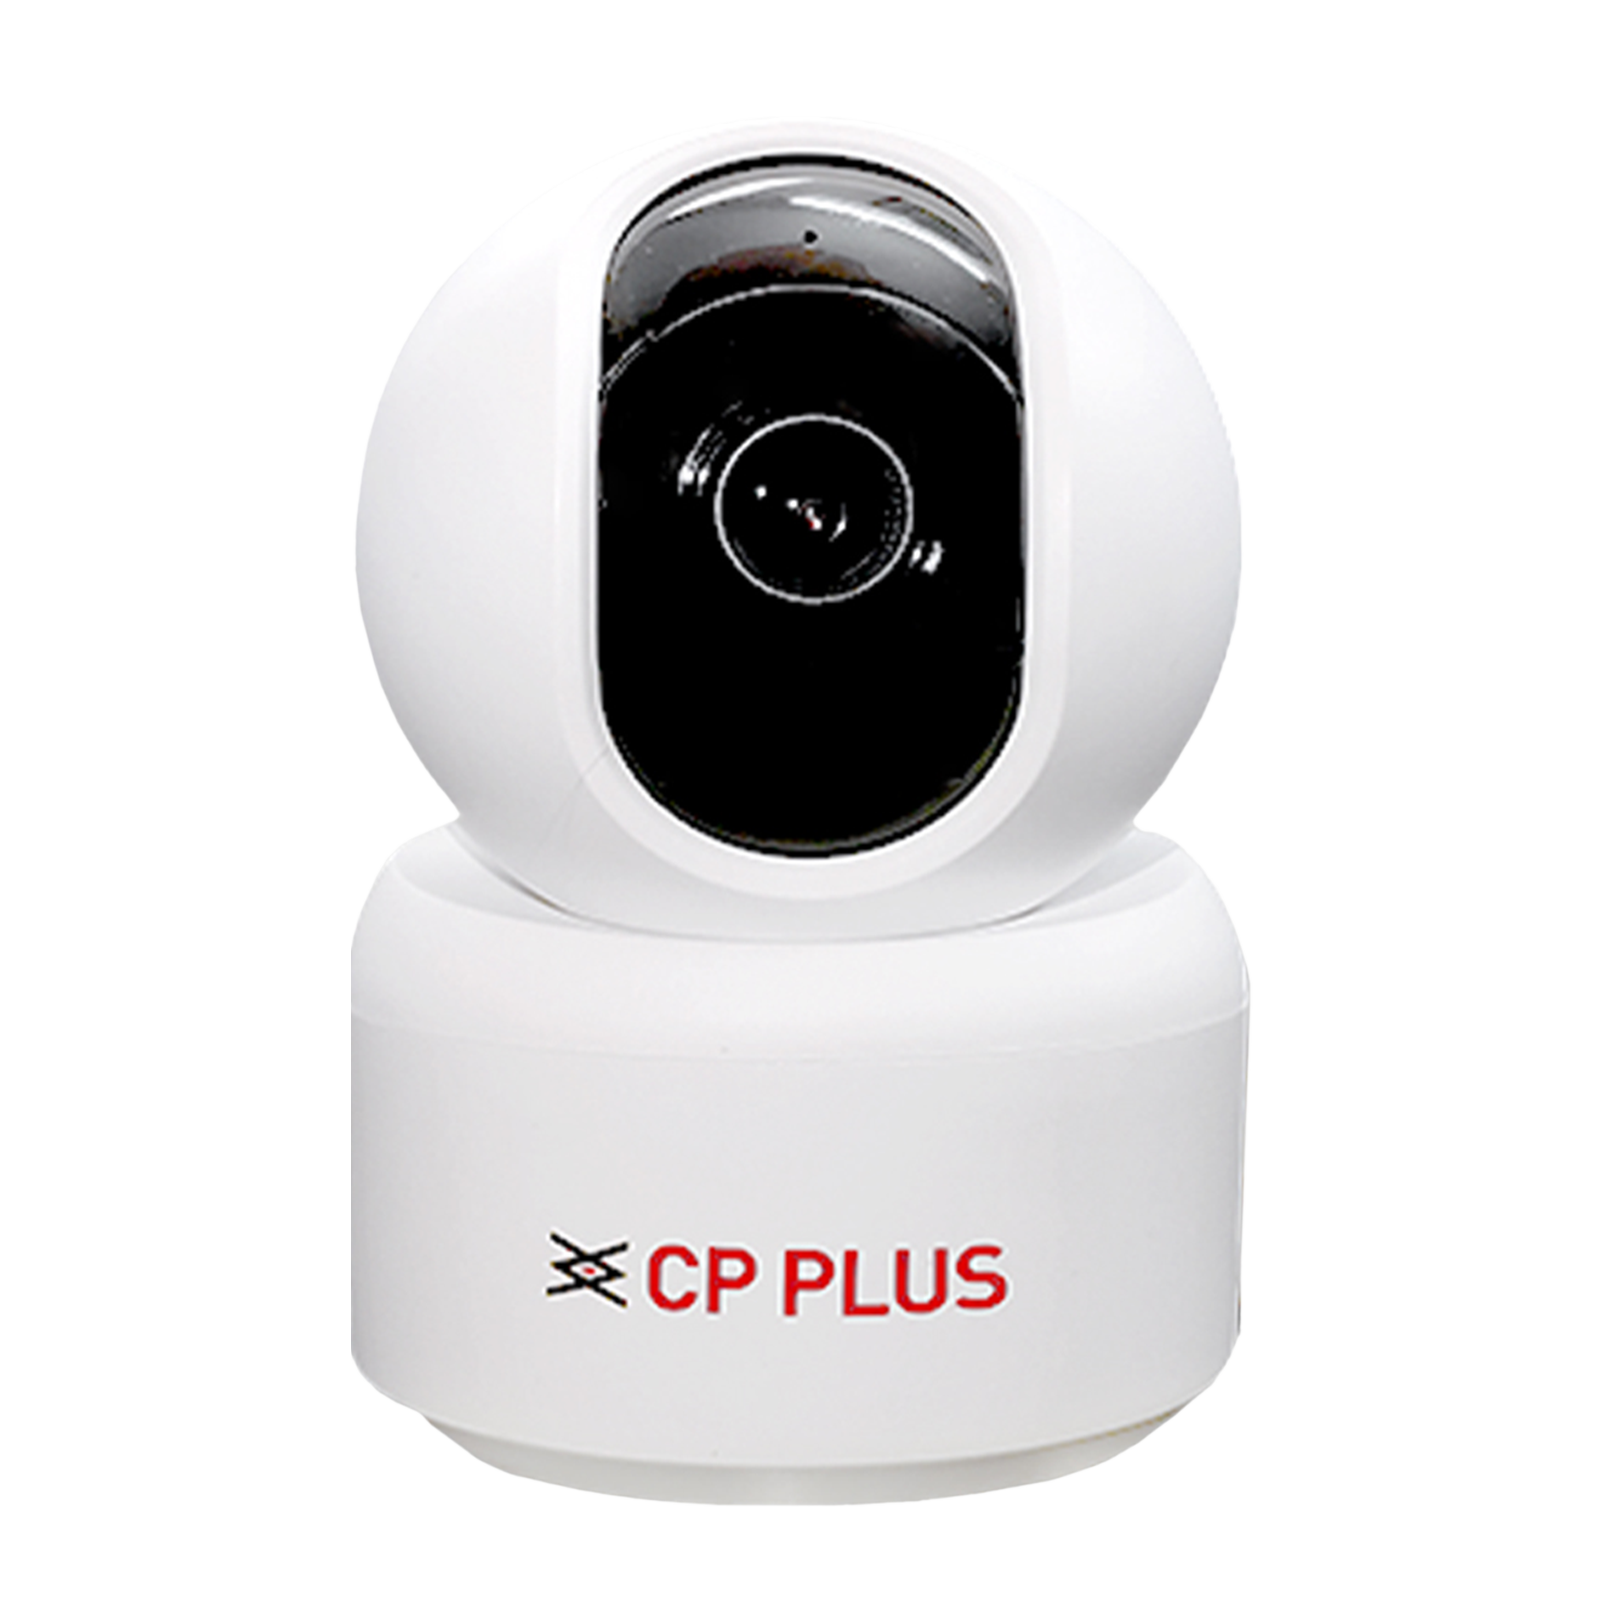 CP PLUS Smart CCTV Security Camera (Google Assistant Support, CP-E25A, White)